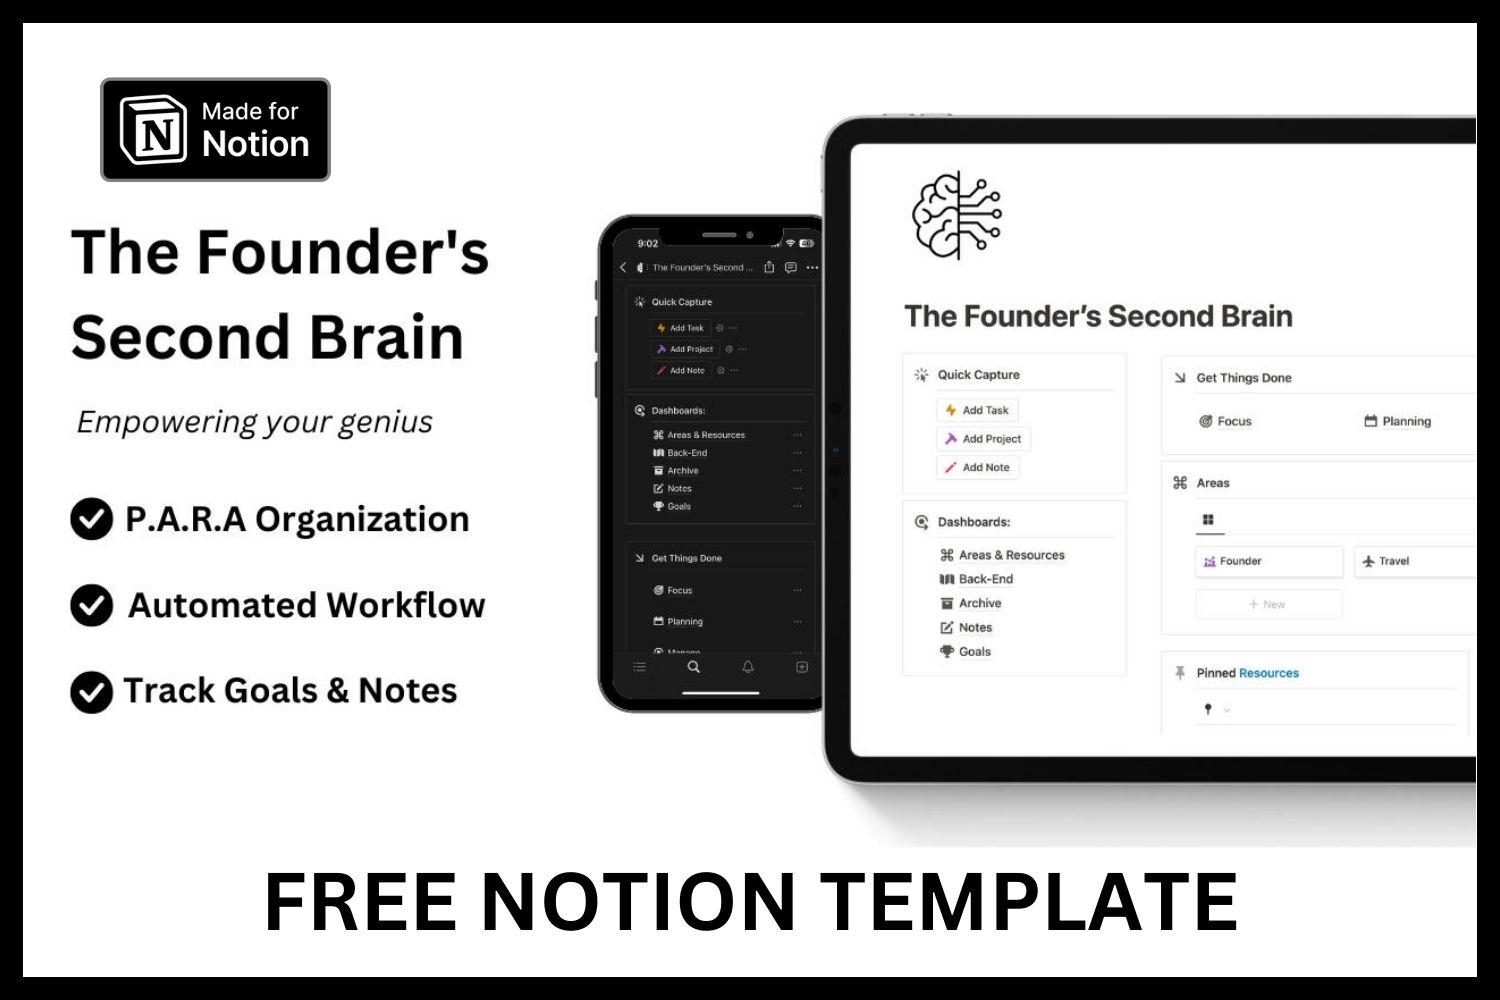 Free Notion Template